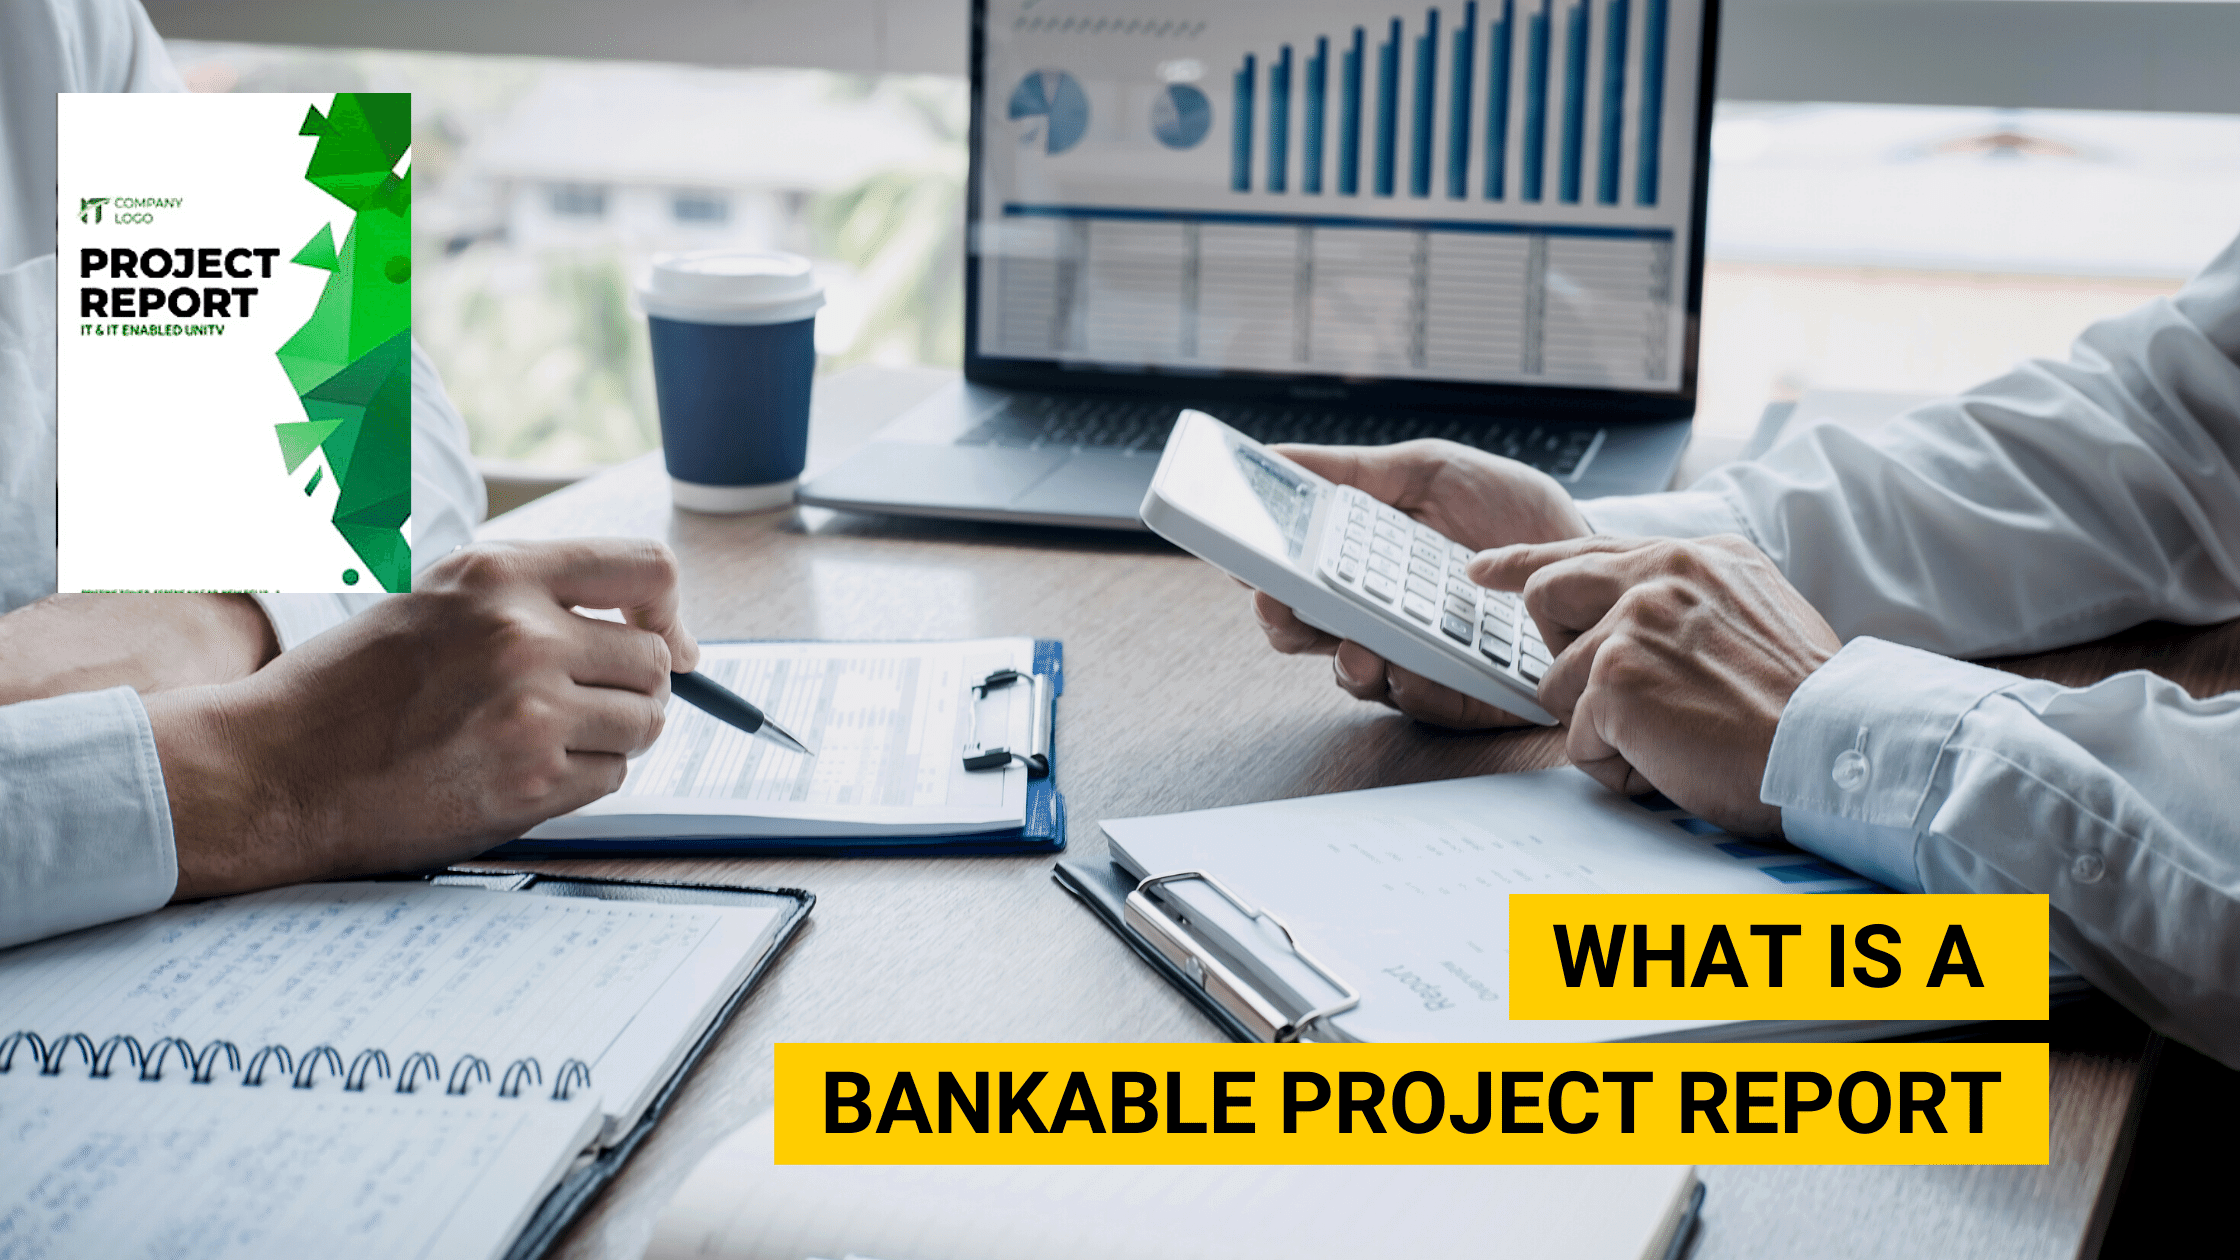 What is a Bankable Project Report